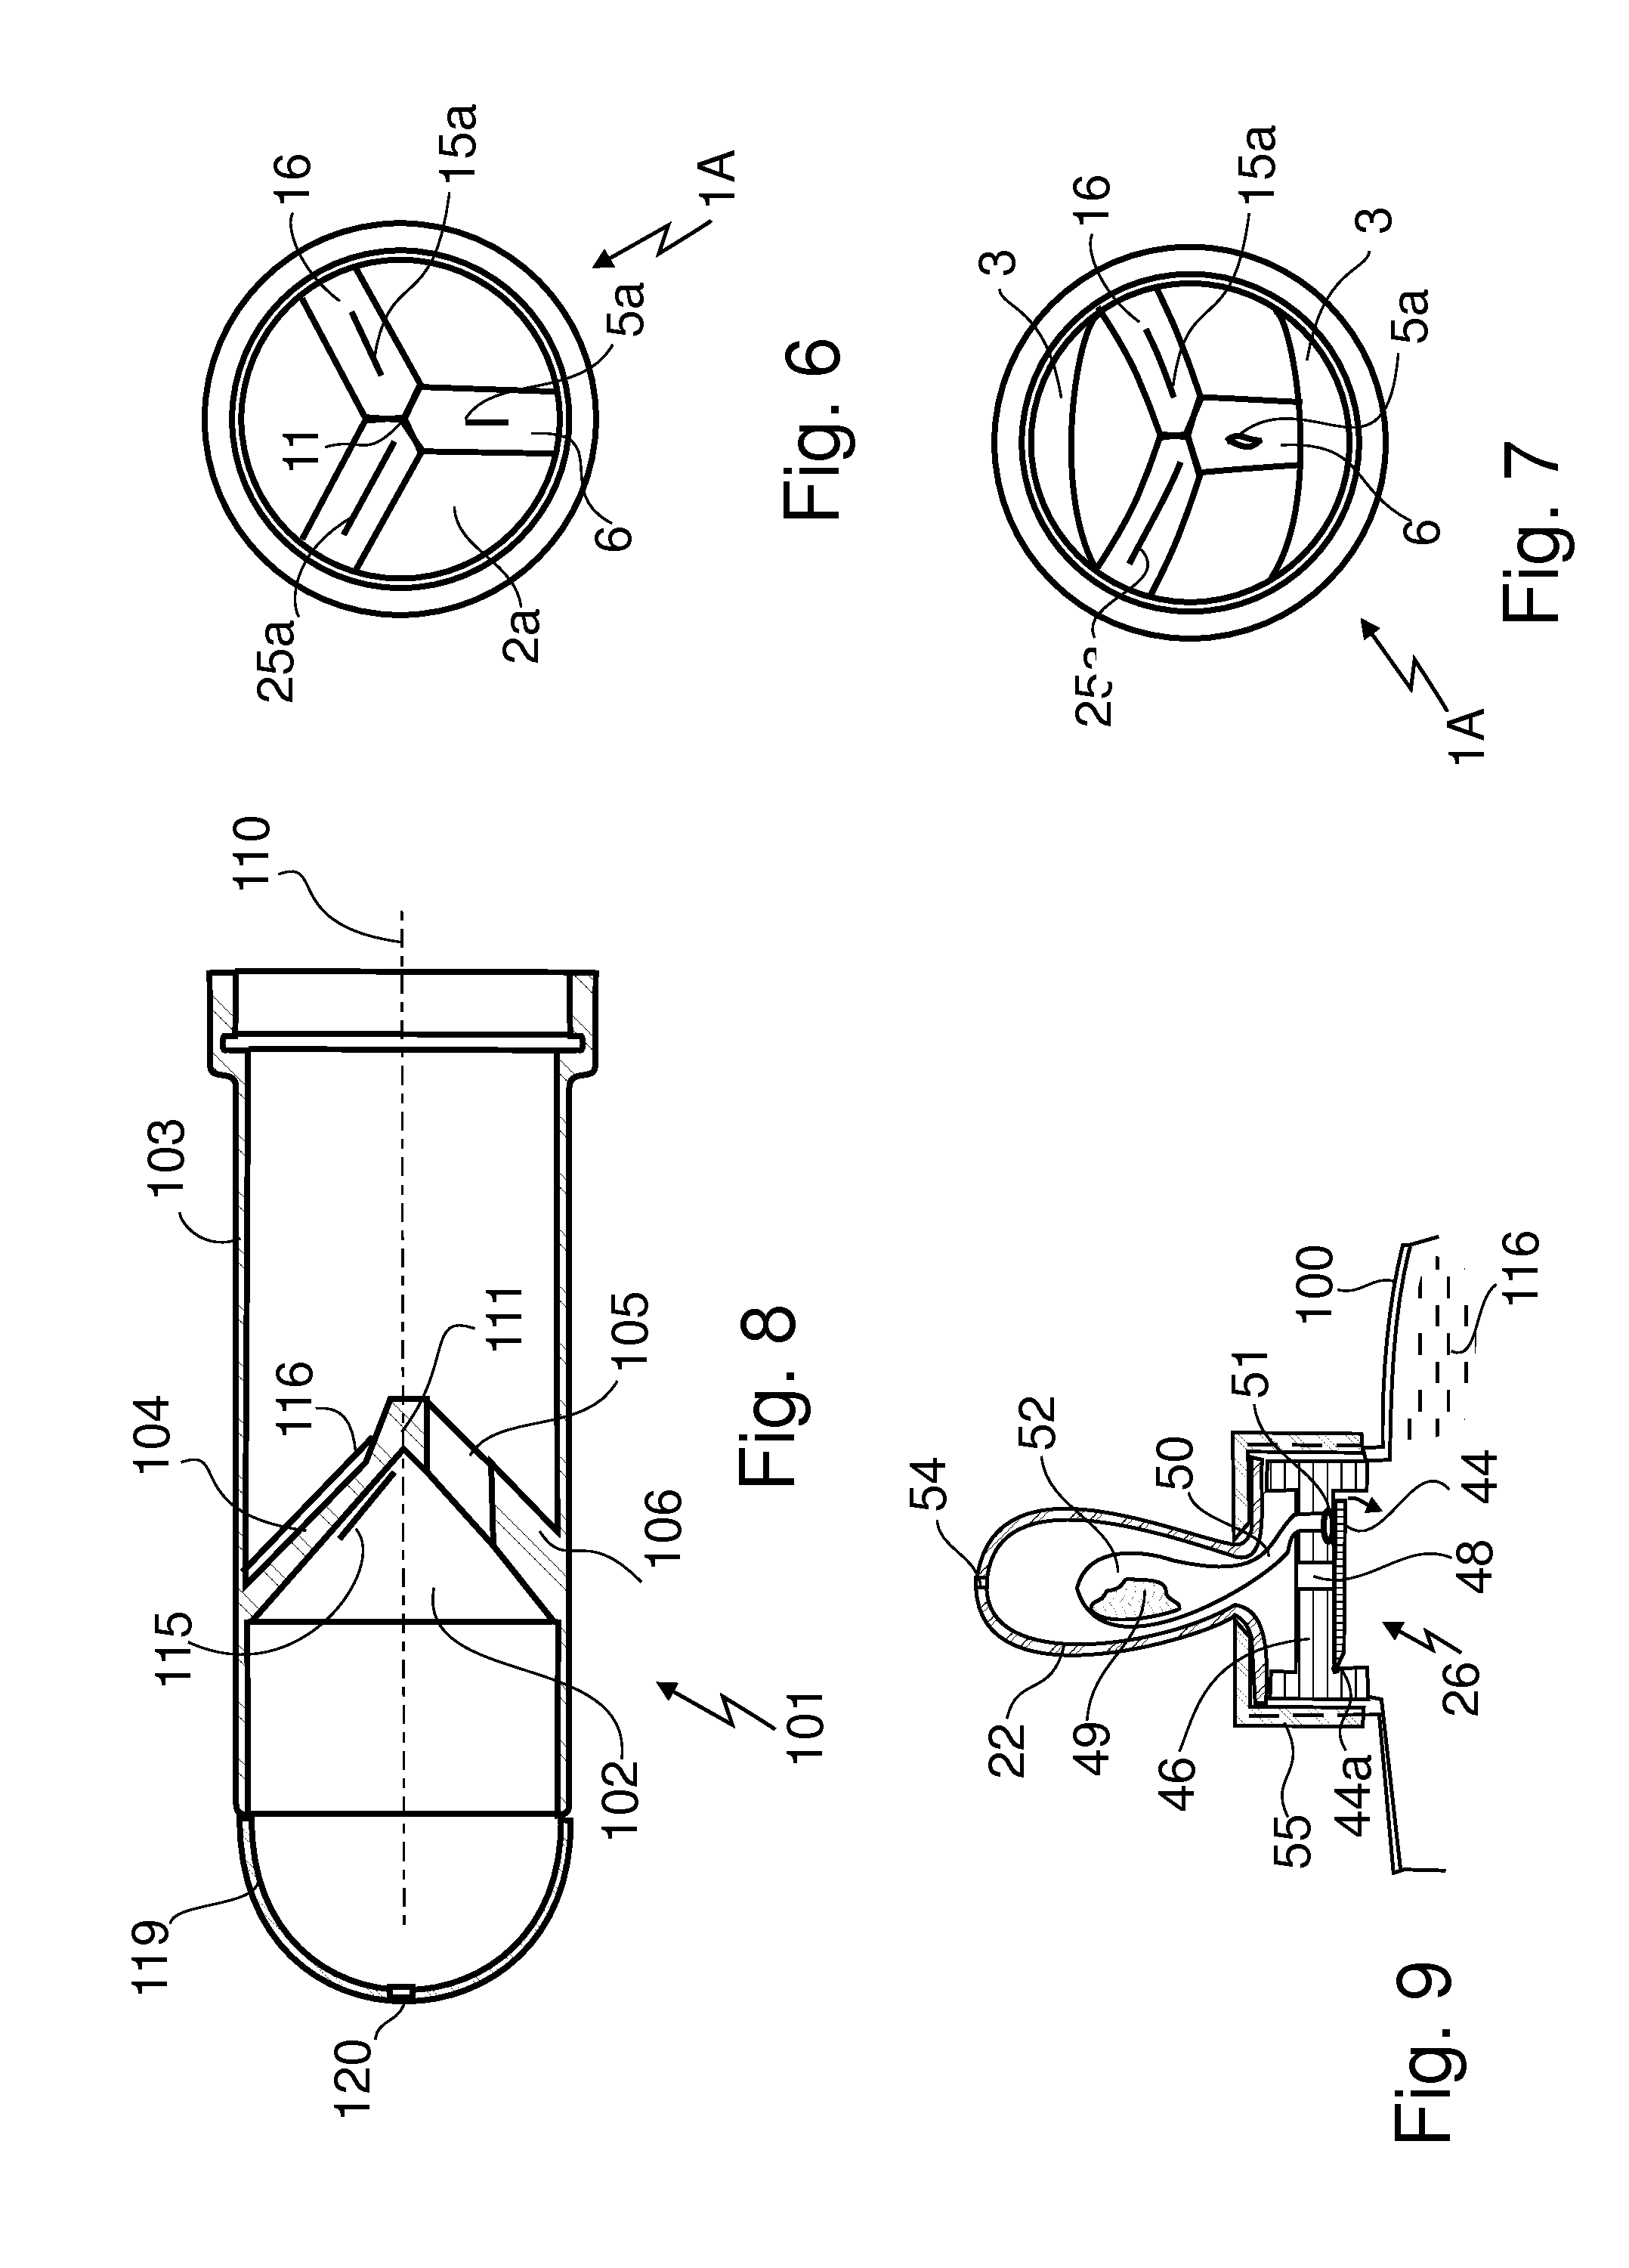 Unidirectional valve for pressurized containers